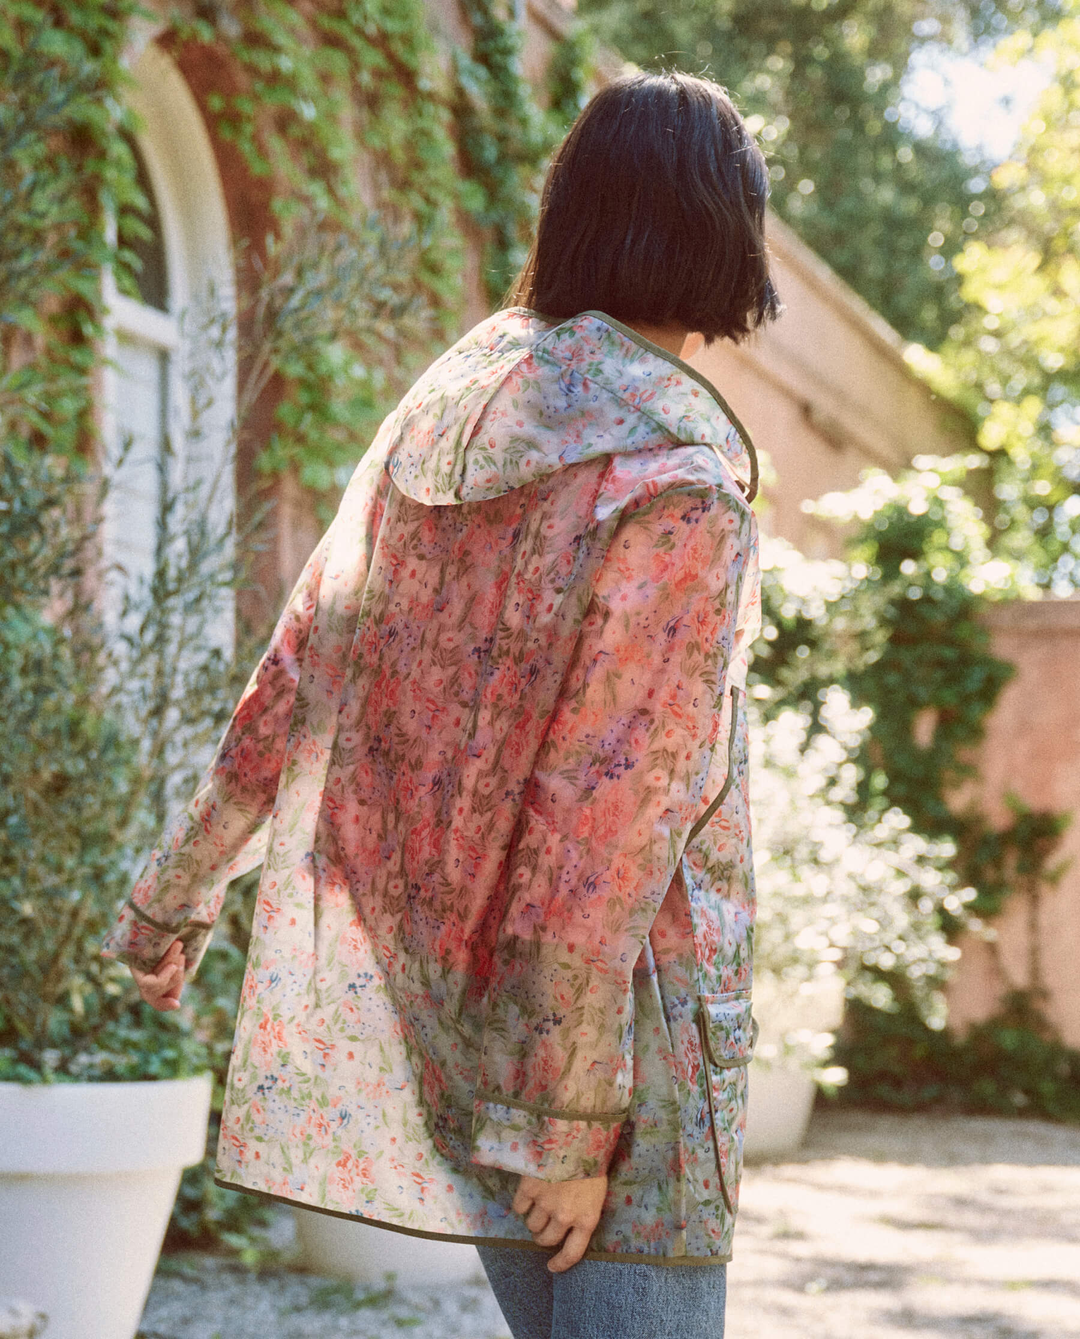 The Great - The Raincoat in Sweet Meadow Floral